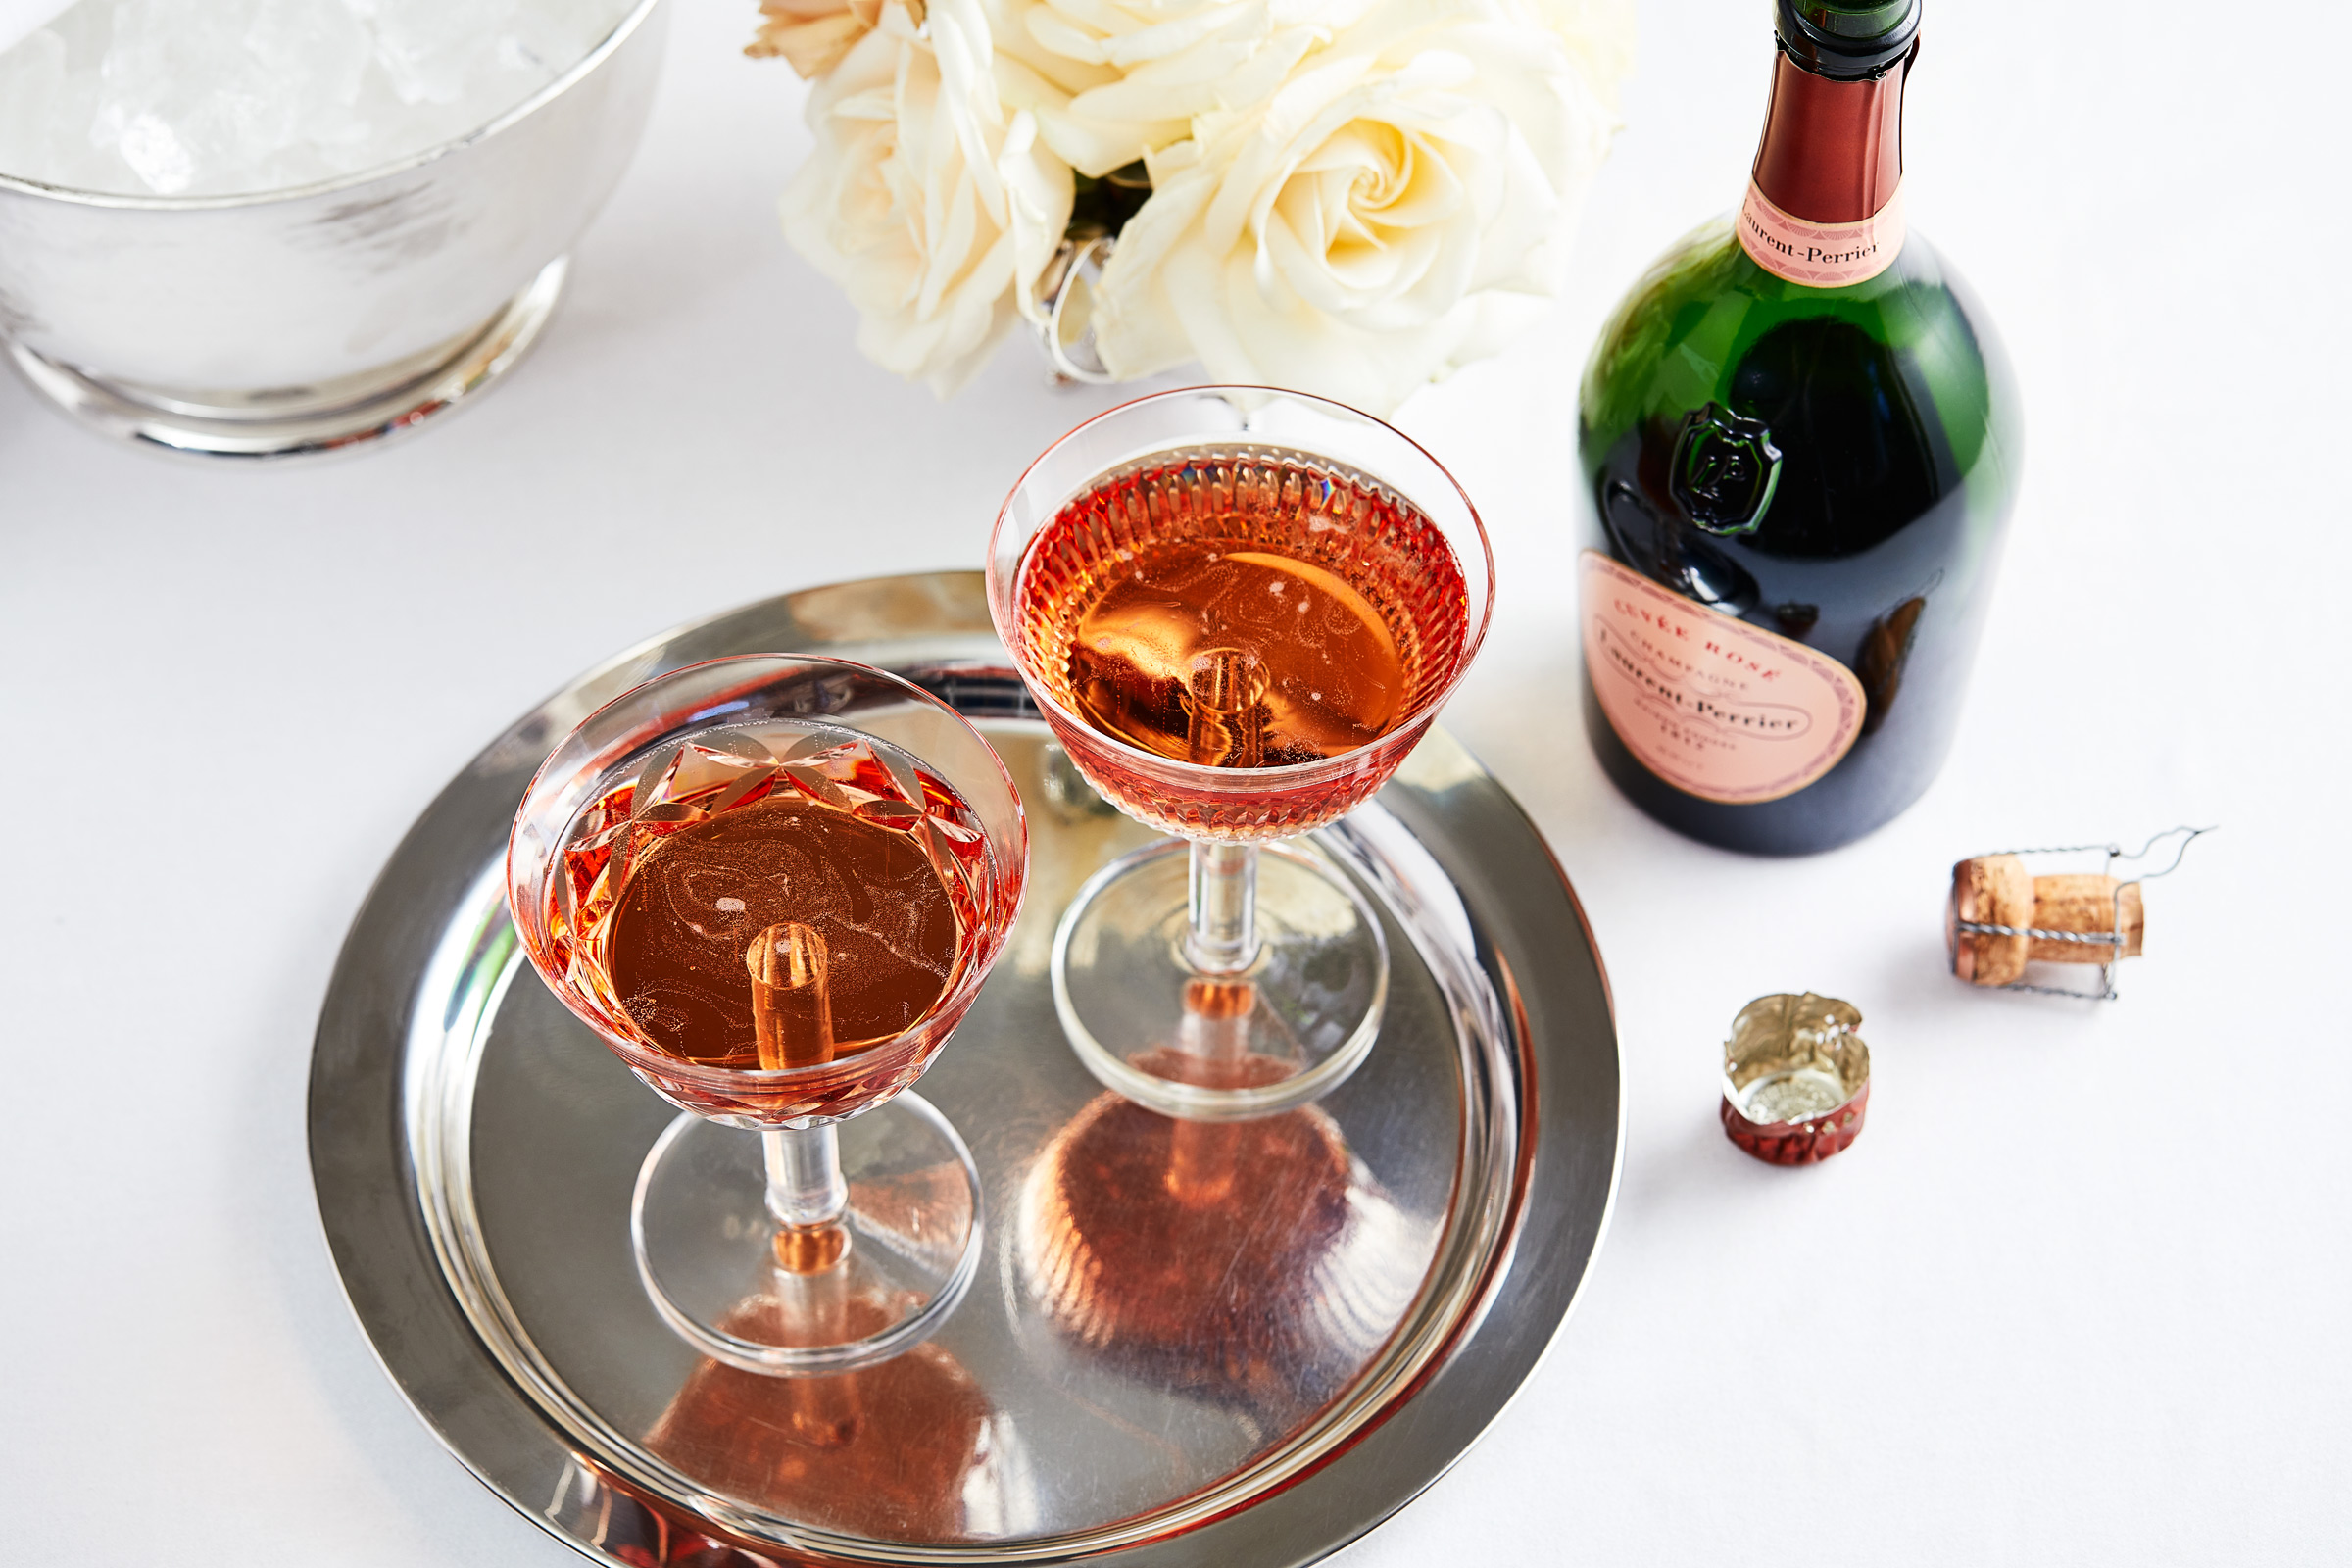 Laurent Perrier Rose Champagne Coupe Glasses.